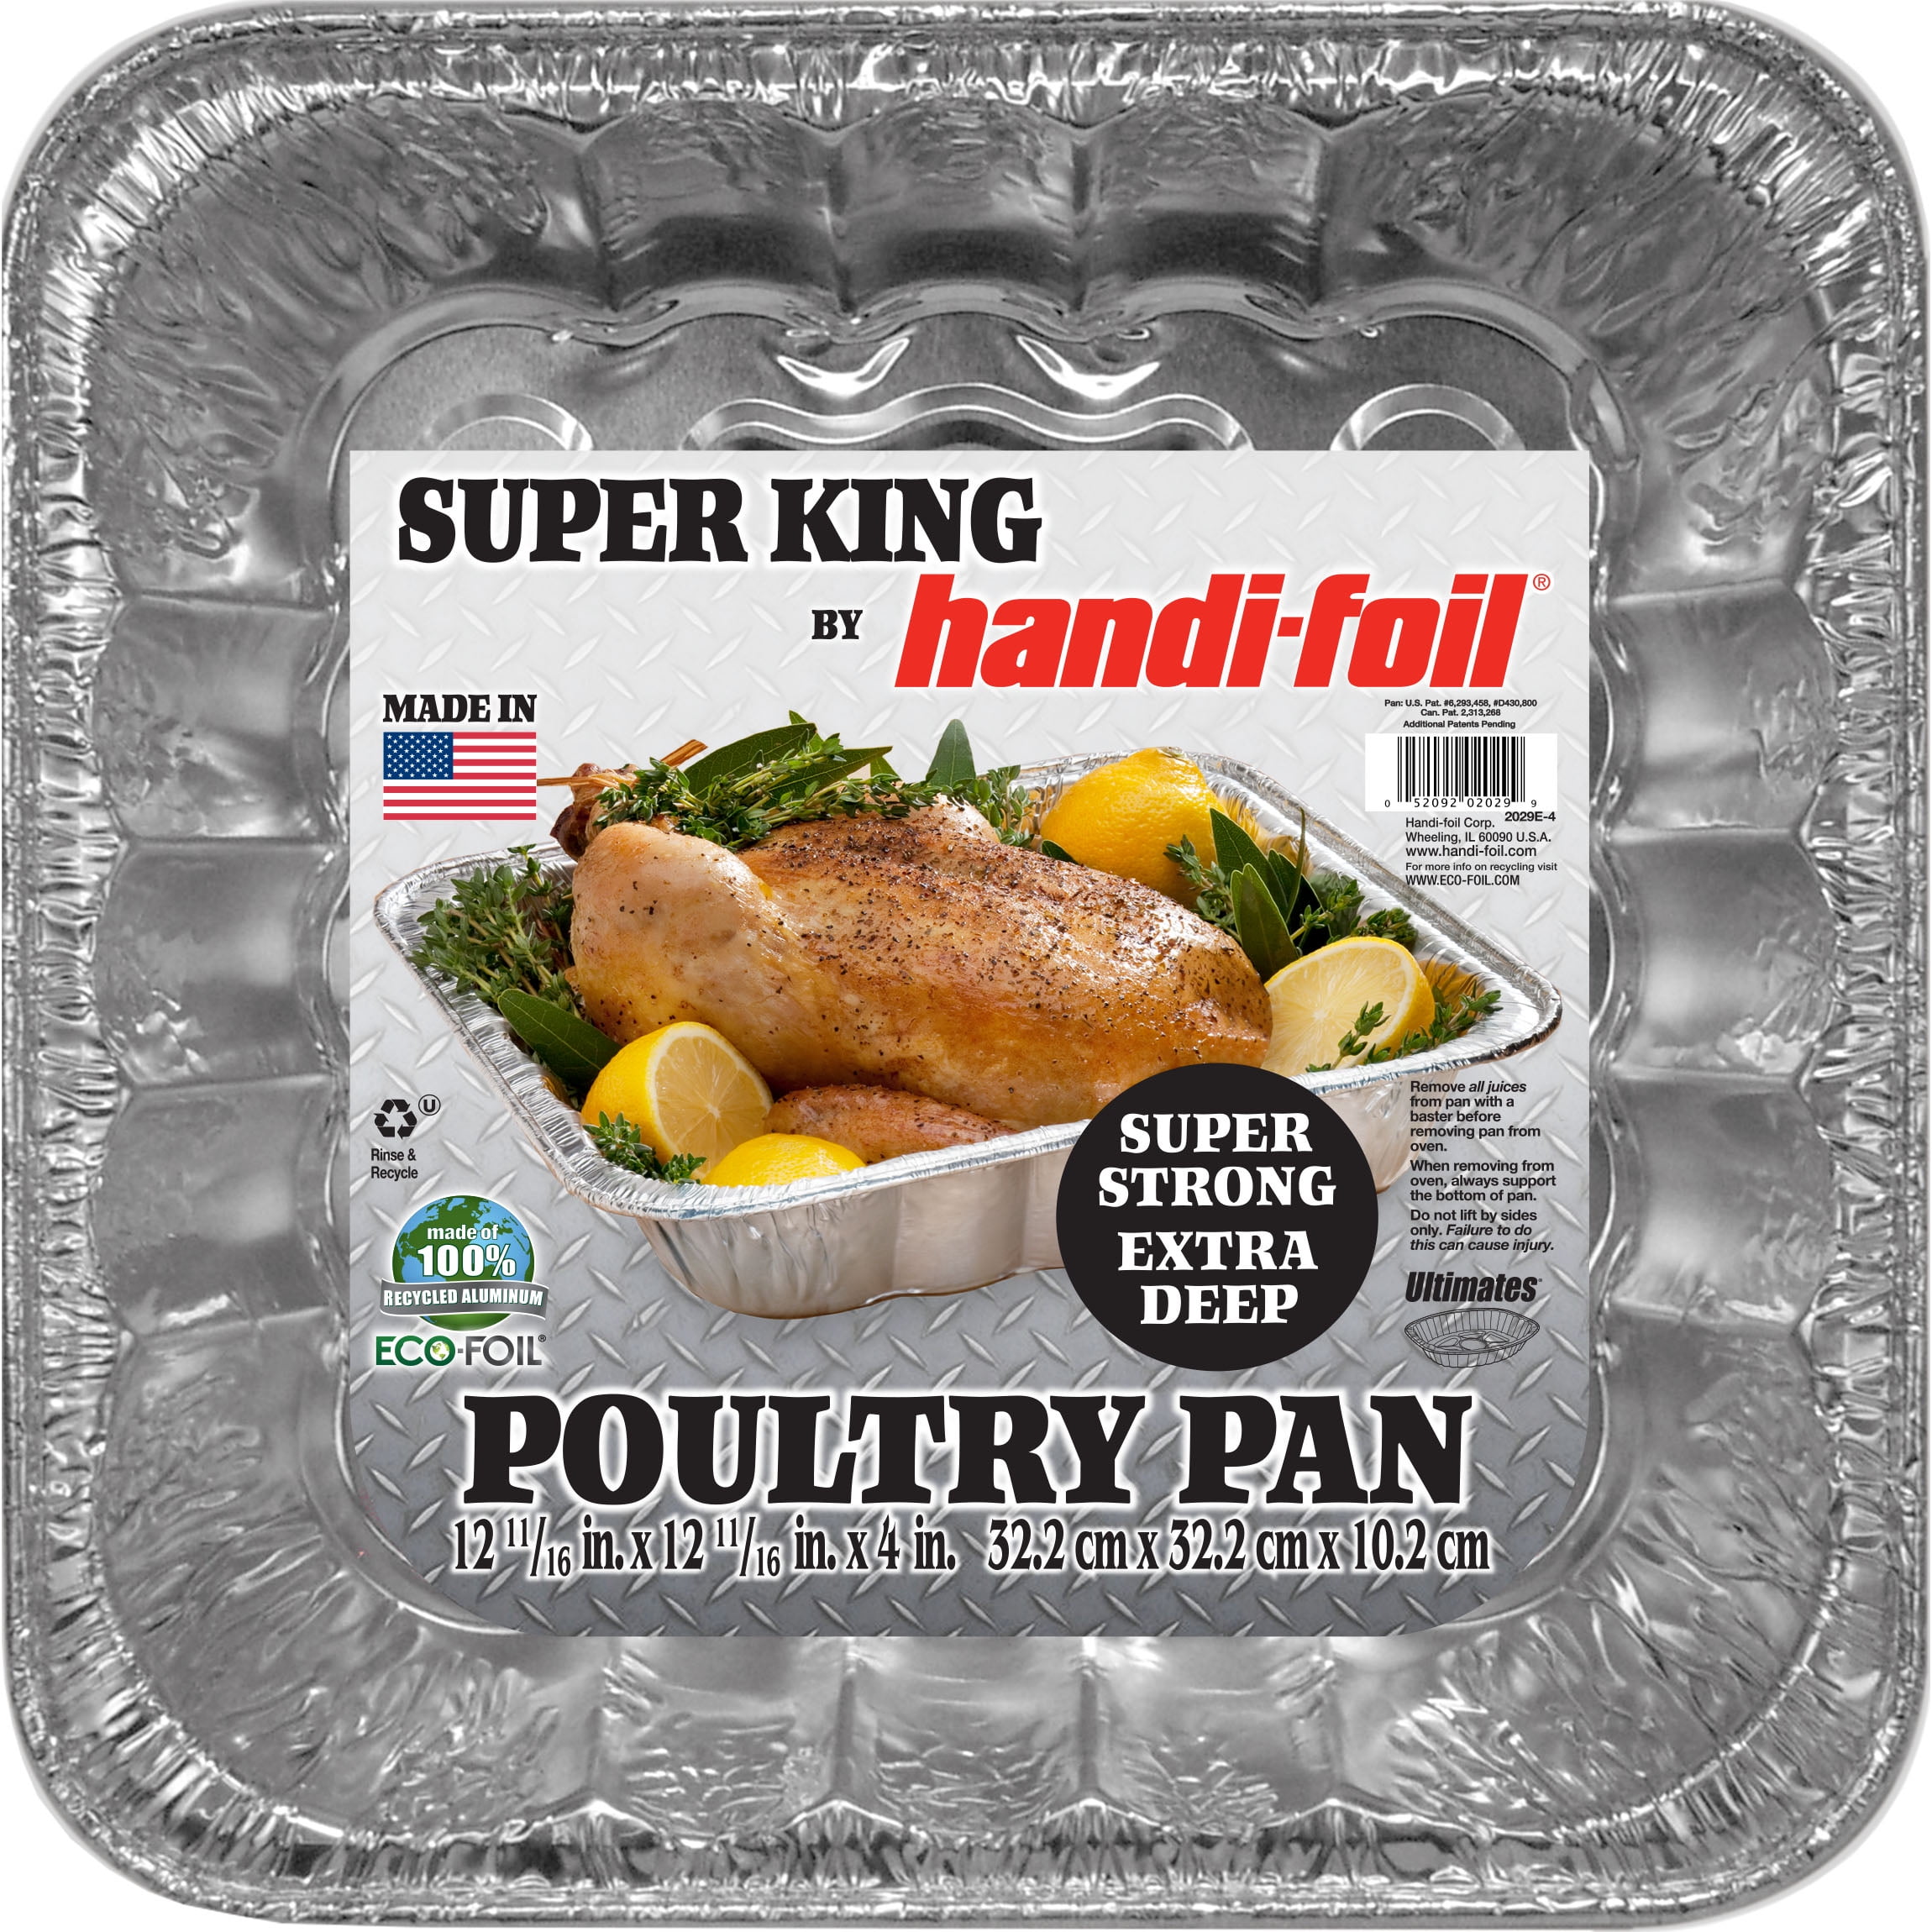 Vezee Extra Large Heavyduty Disposable Durable Turkey Roaster Aluminum Pans, Oval Shape for Chicken, Meat, Brisket, Roasting, Baking, Recyclable Along